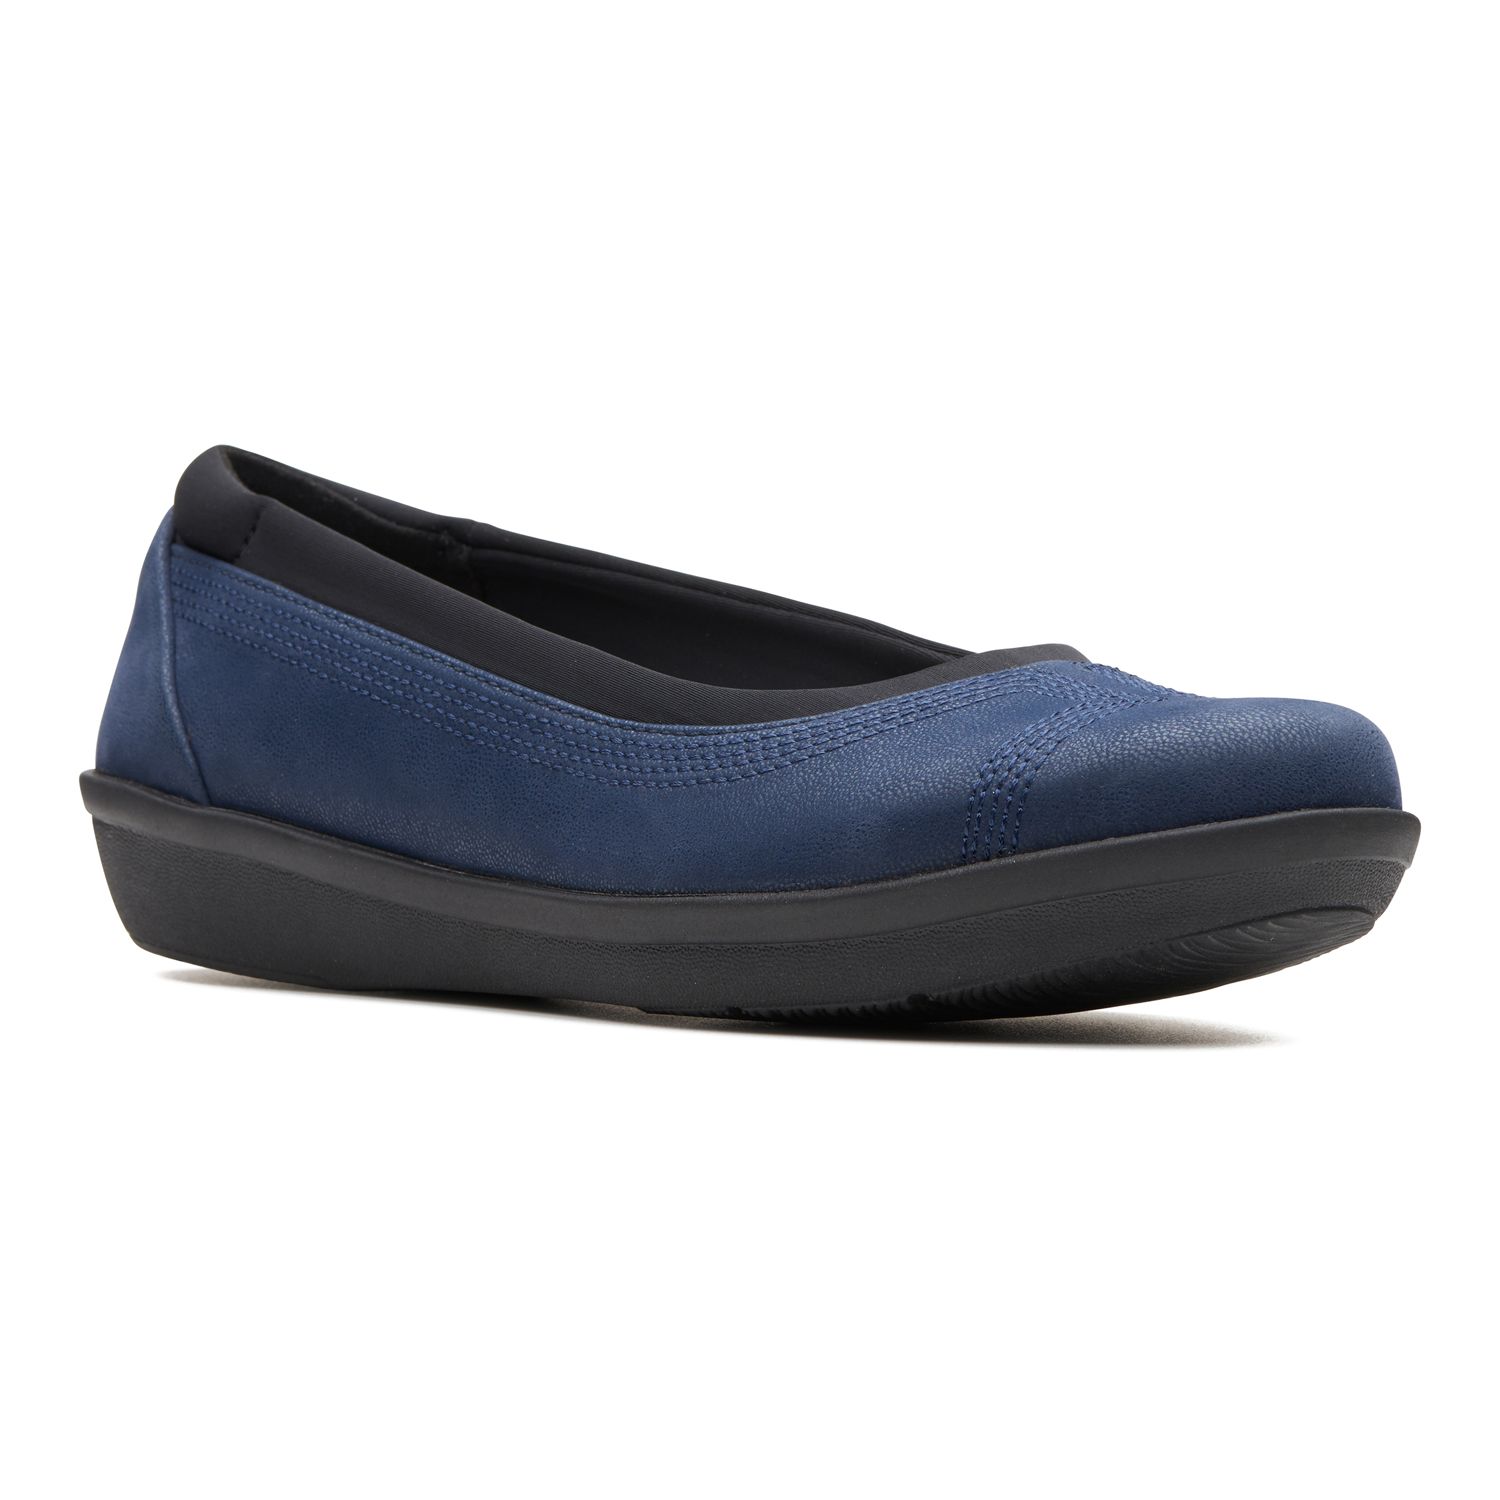 Clarks Shoes Clearance | Kohl's